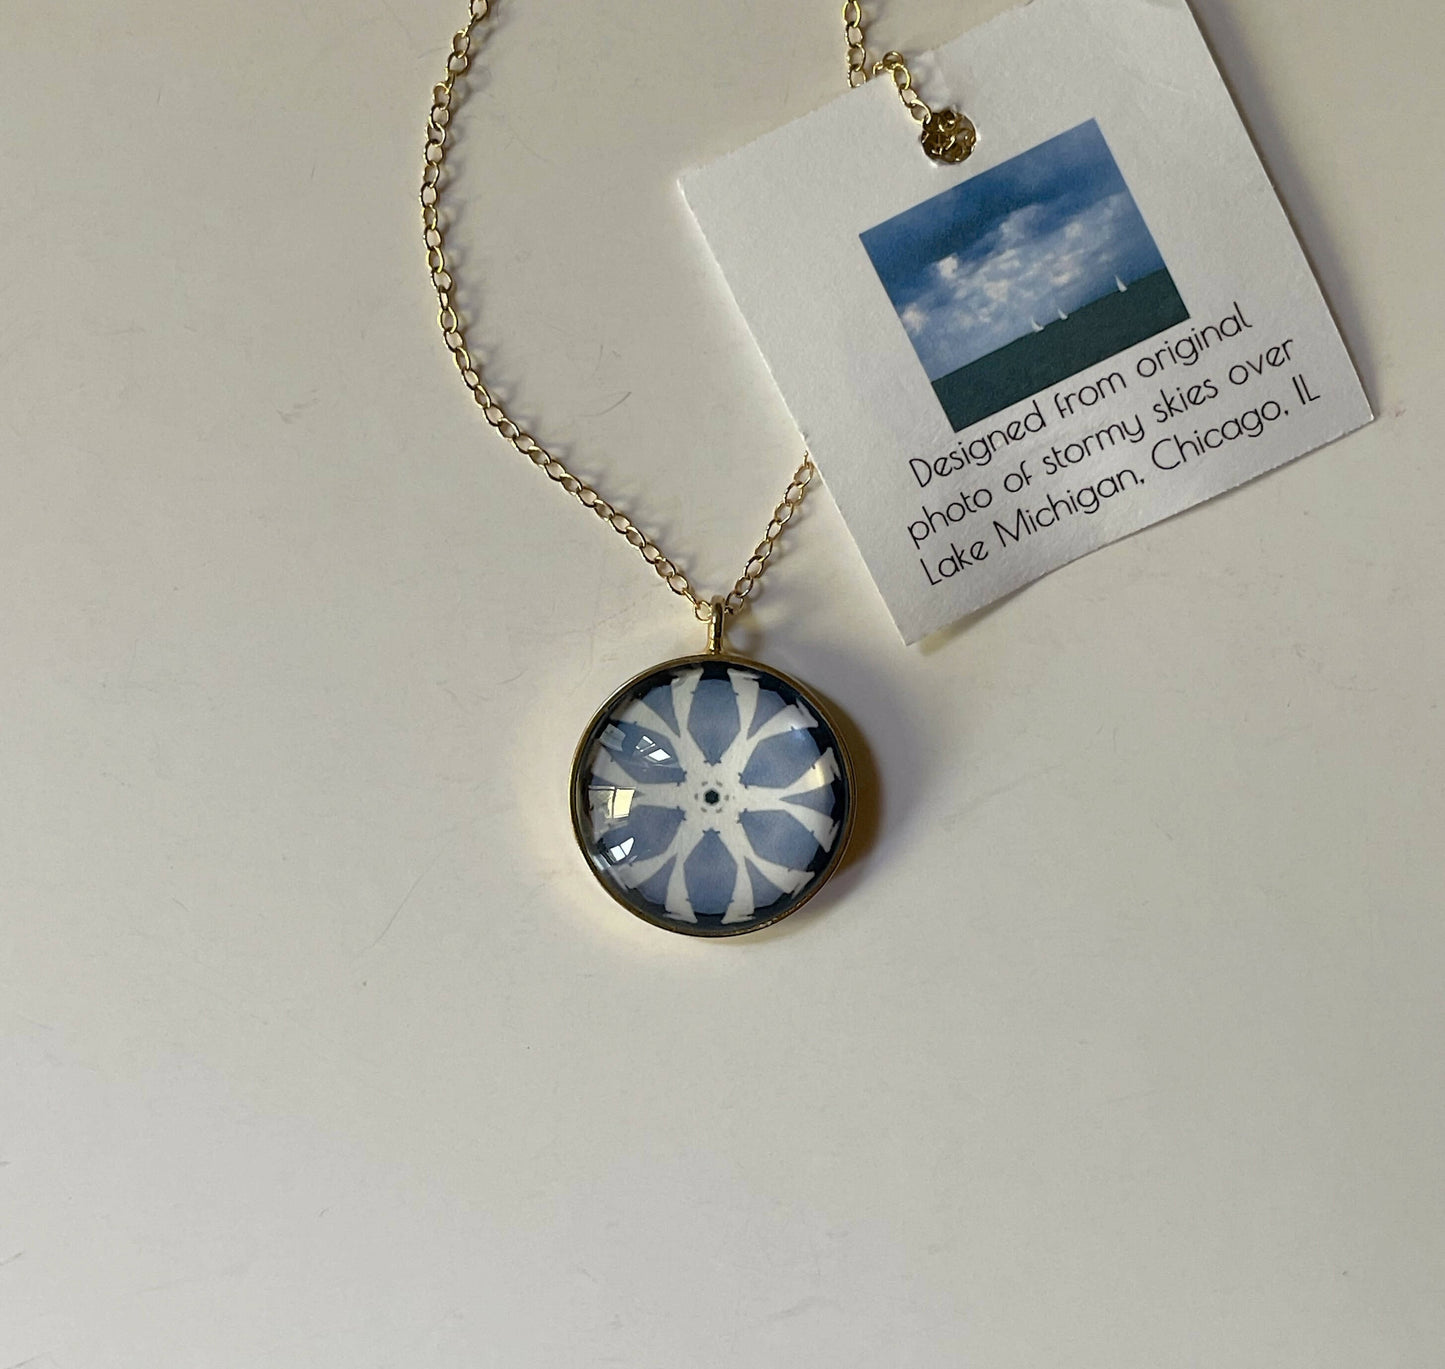 Summer Storm over Lake Michigan Necklace